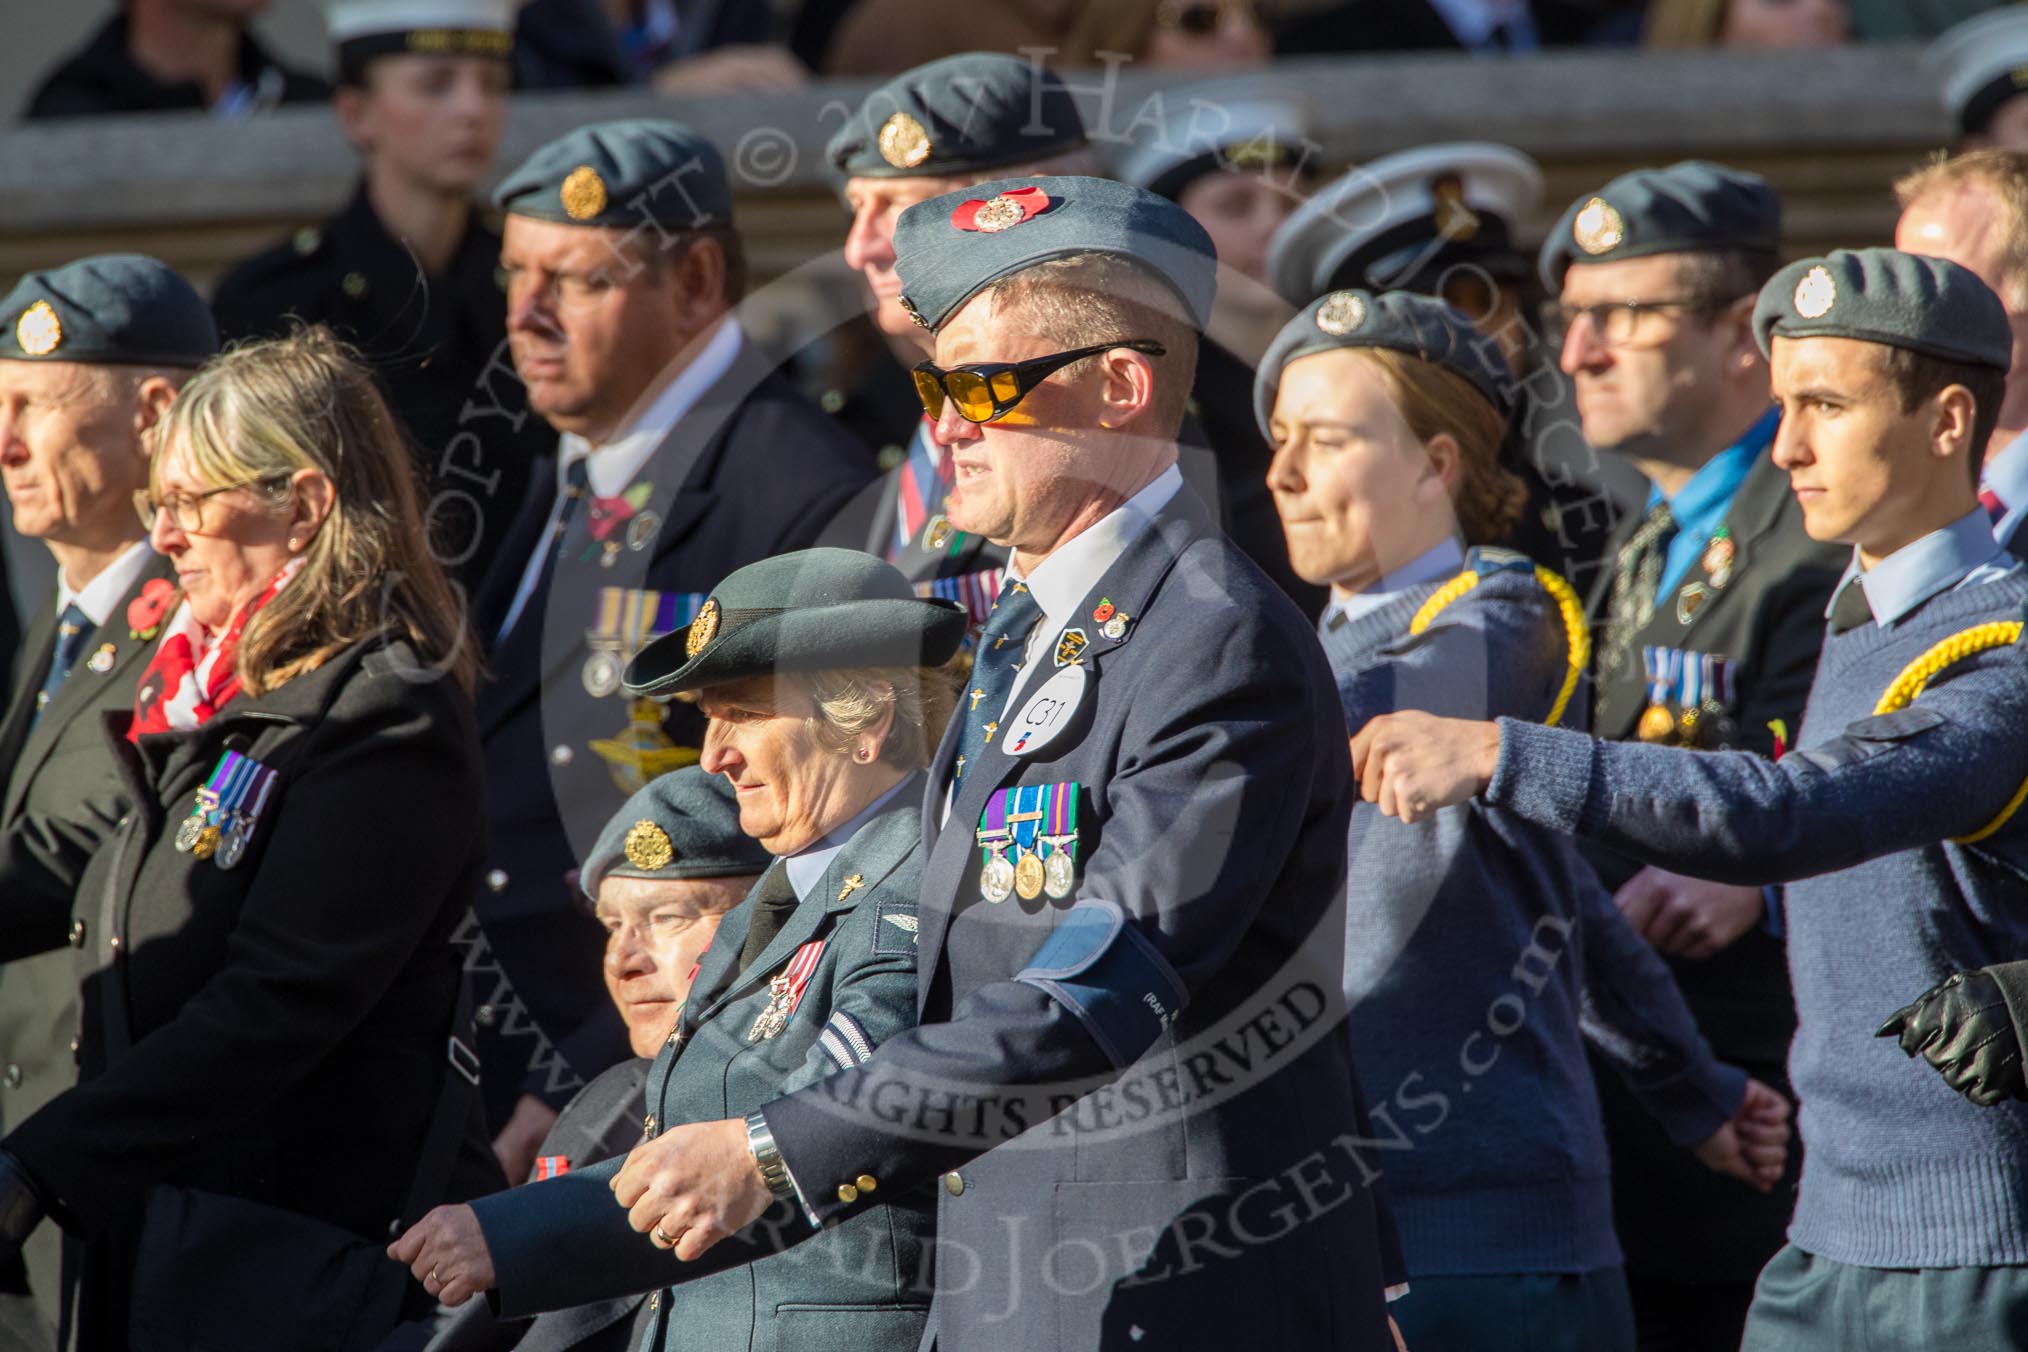 Royal Air Forces Association (Caduceus) branch (Group C31, 22 members) during the Royal British Legion March Past on Remembrance Sunday at the Cenotaph, Whitehall, Westminster, London, 11 November 2018, 12:19.